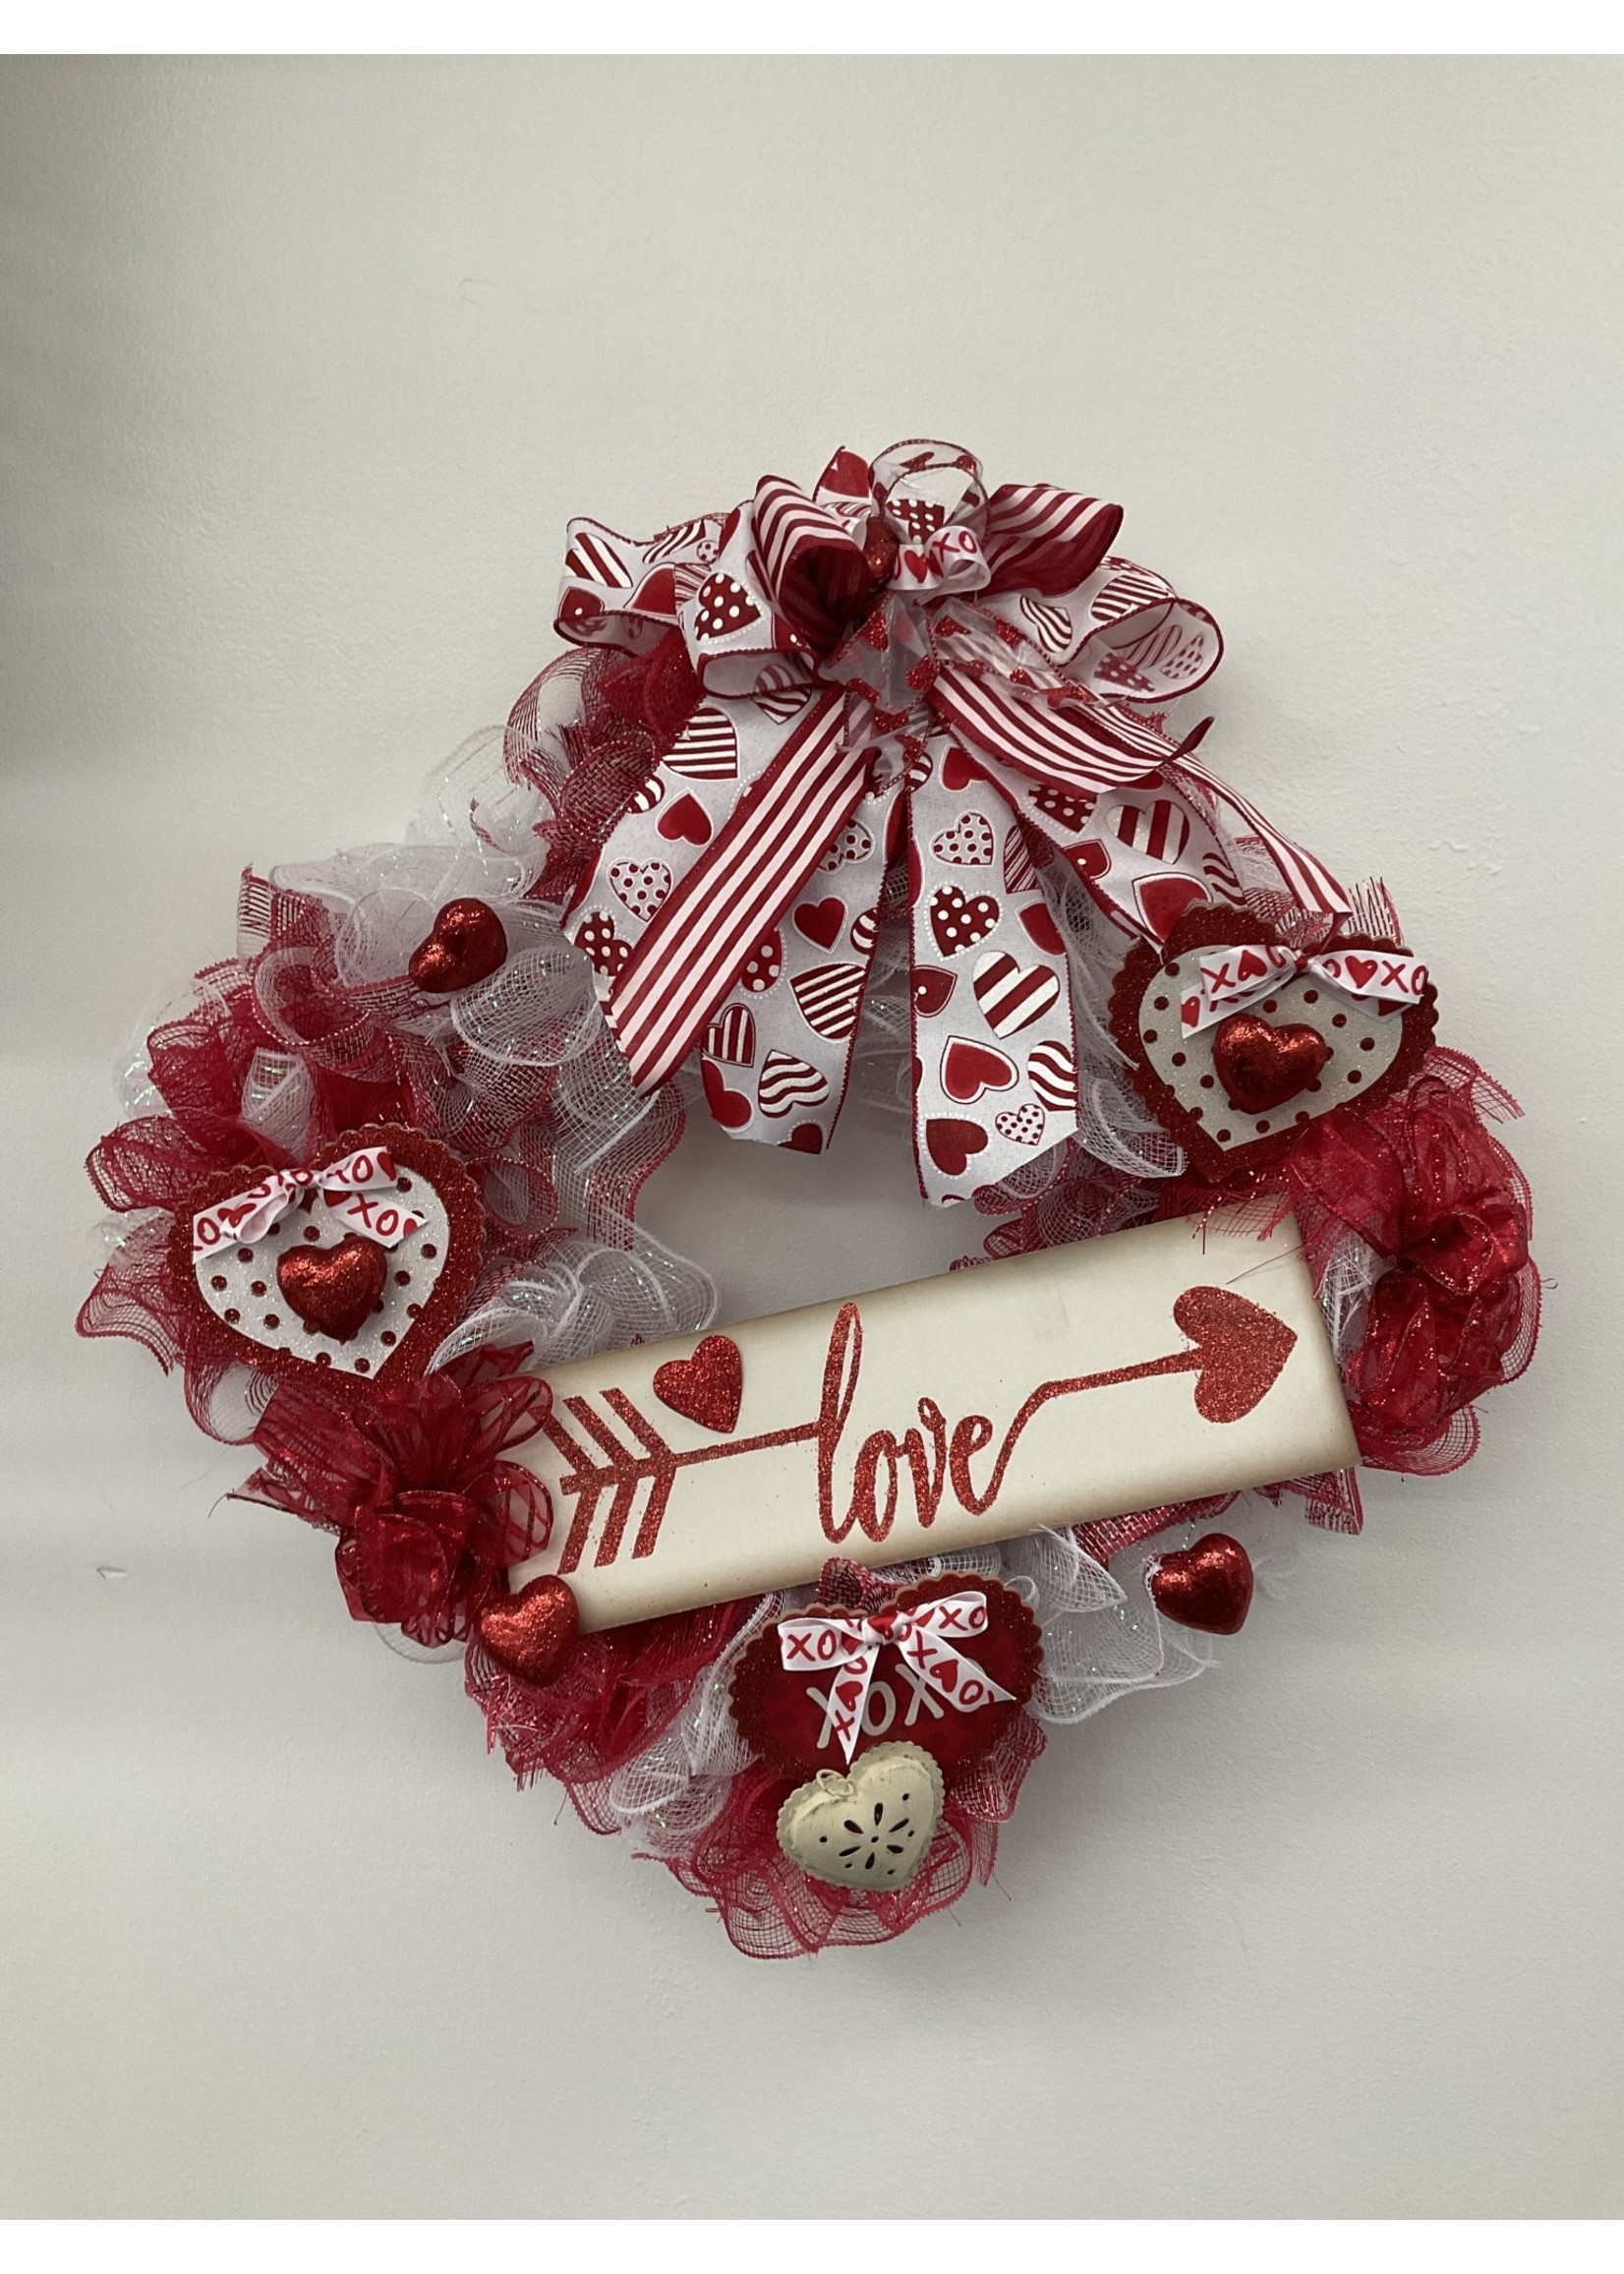 My New Favorite Thing Wreath Mesh "Love" Red & White with Hearts and Heart Ribbon